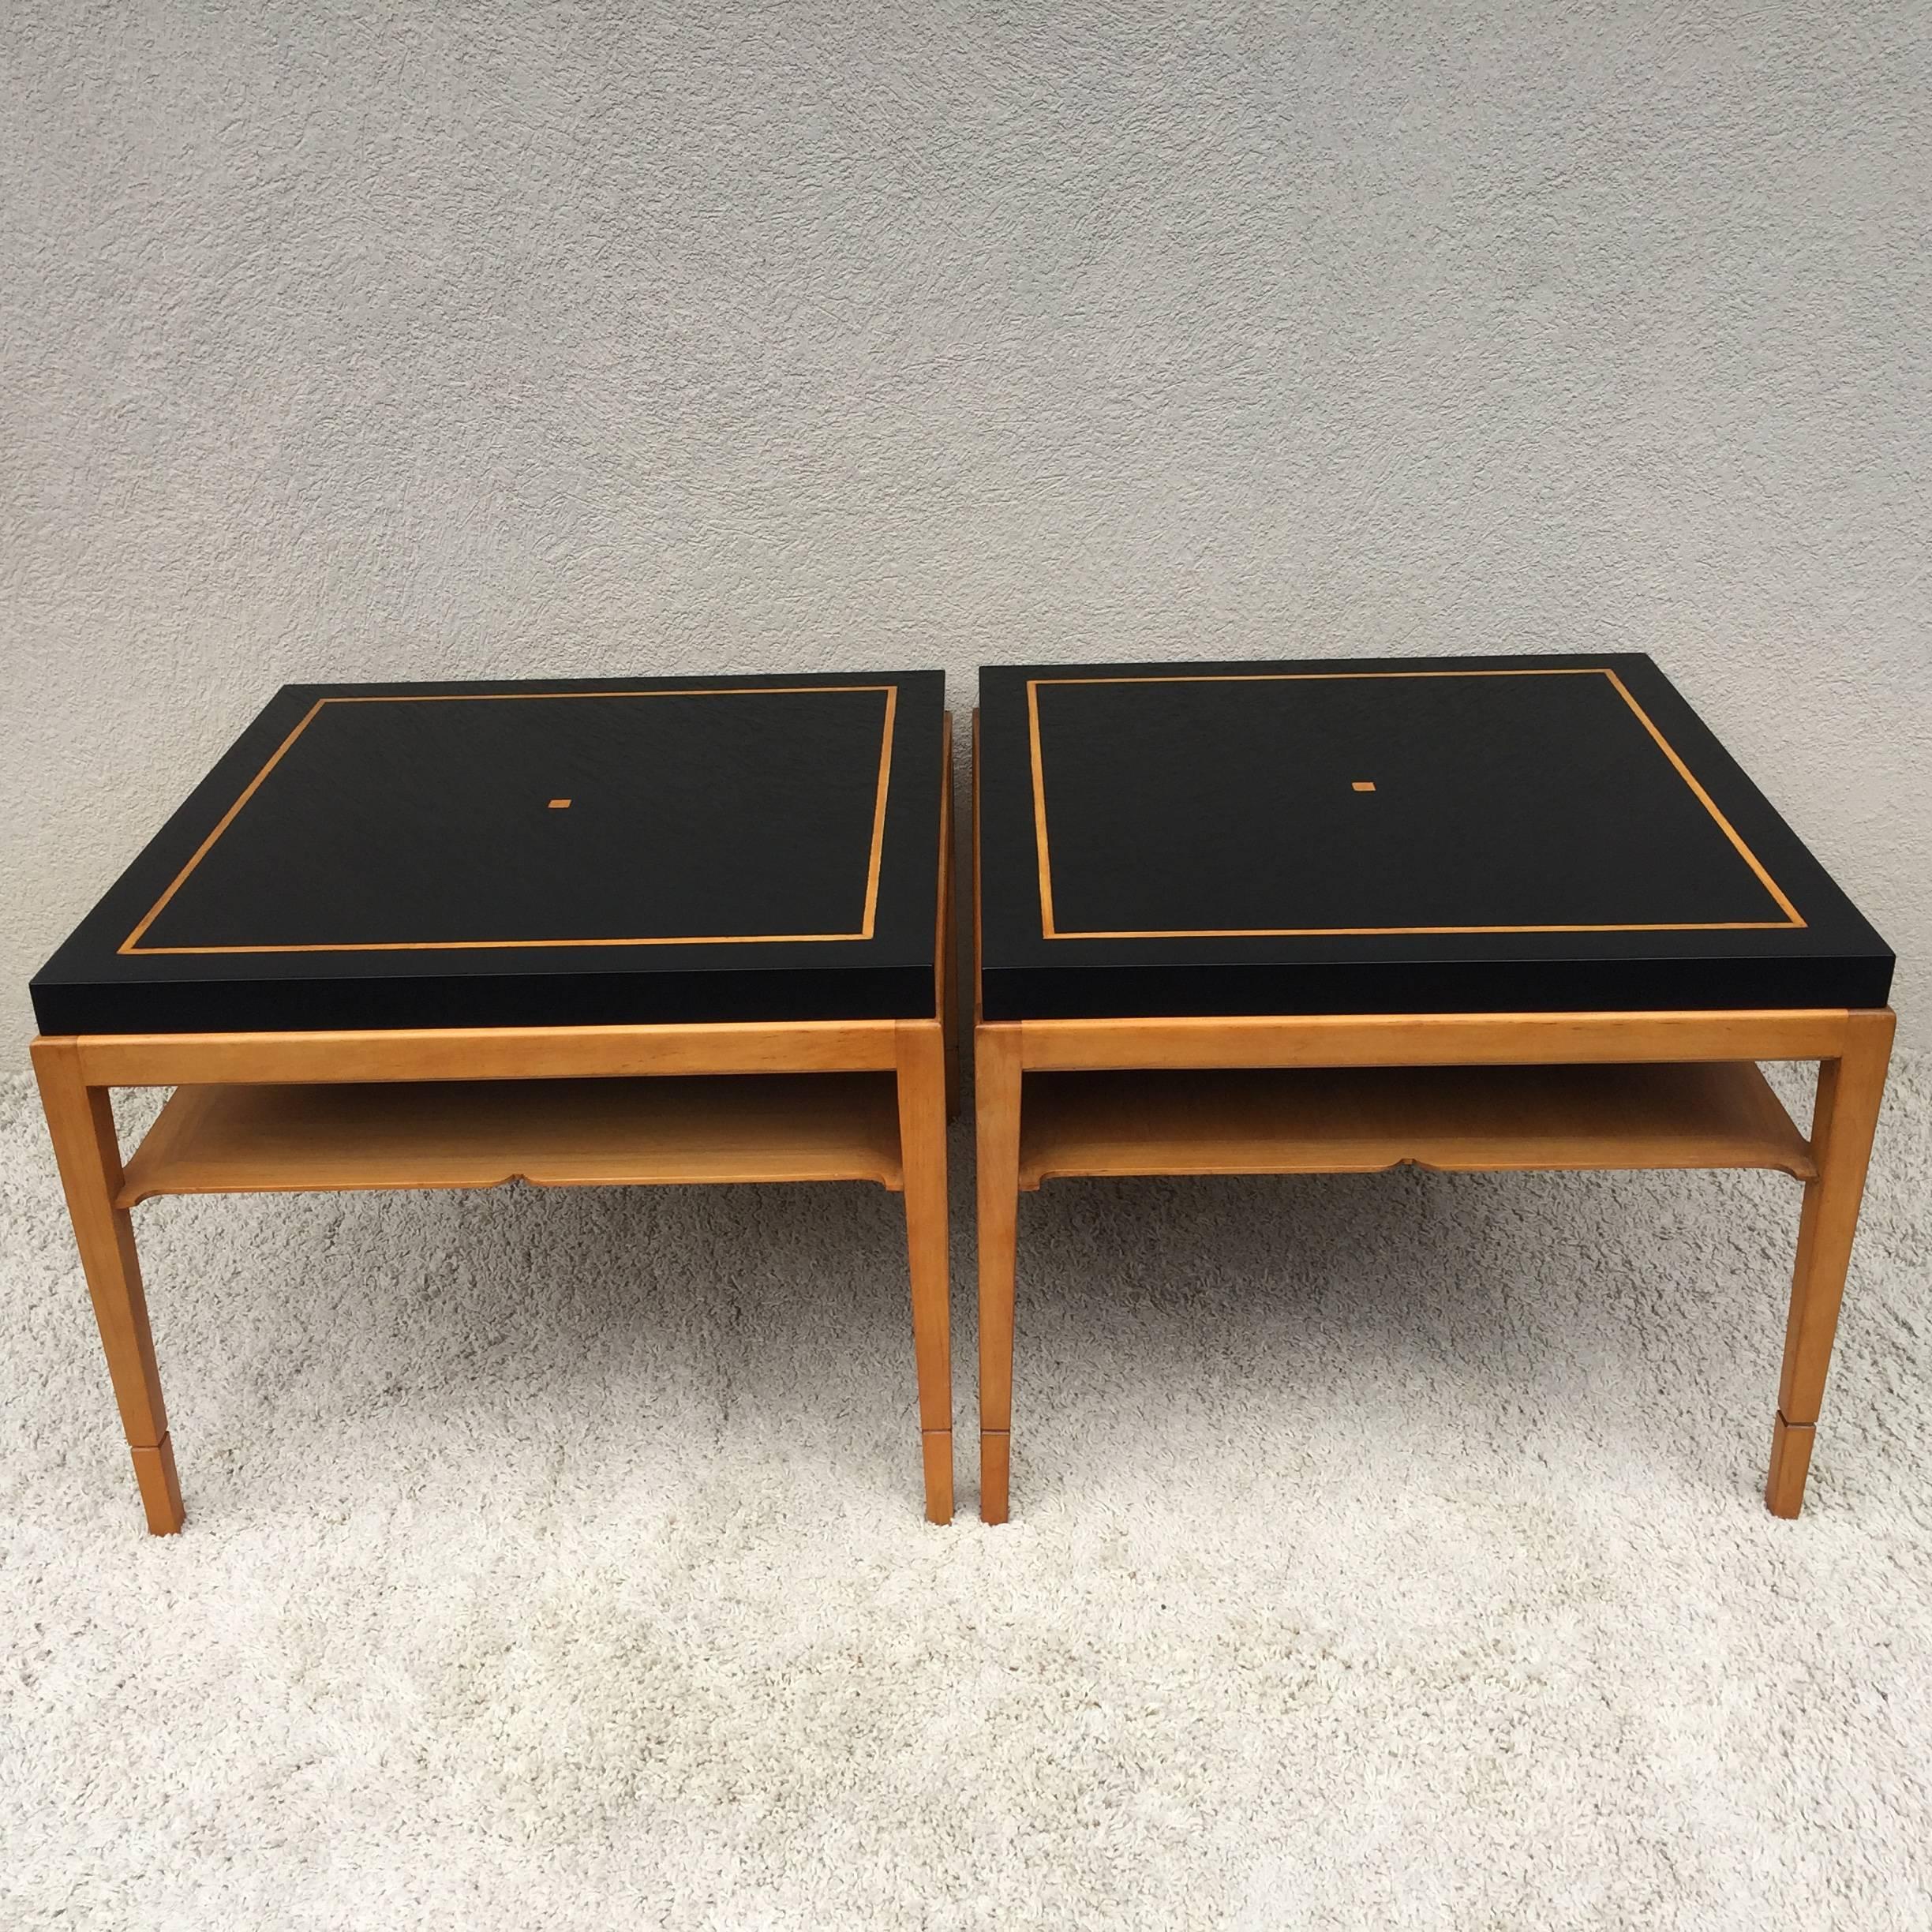 Pair Tommi Parzinger for Parzinger Originals two-tier Hollywood inlaid dark walnut top tables, end tables/ nightstands, in hand rubbed finish.